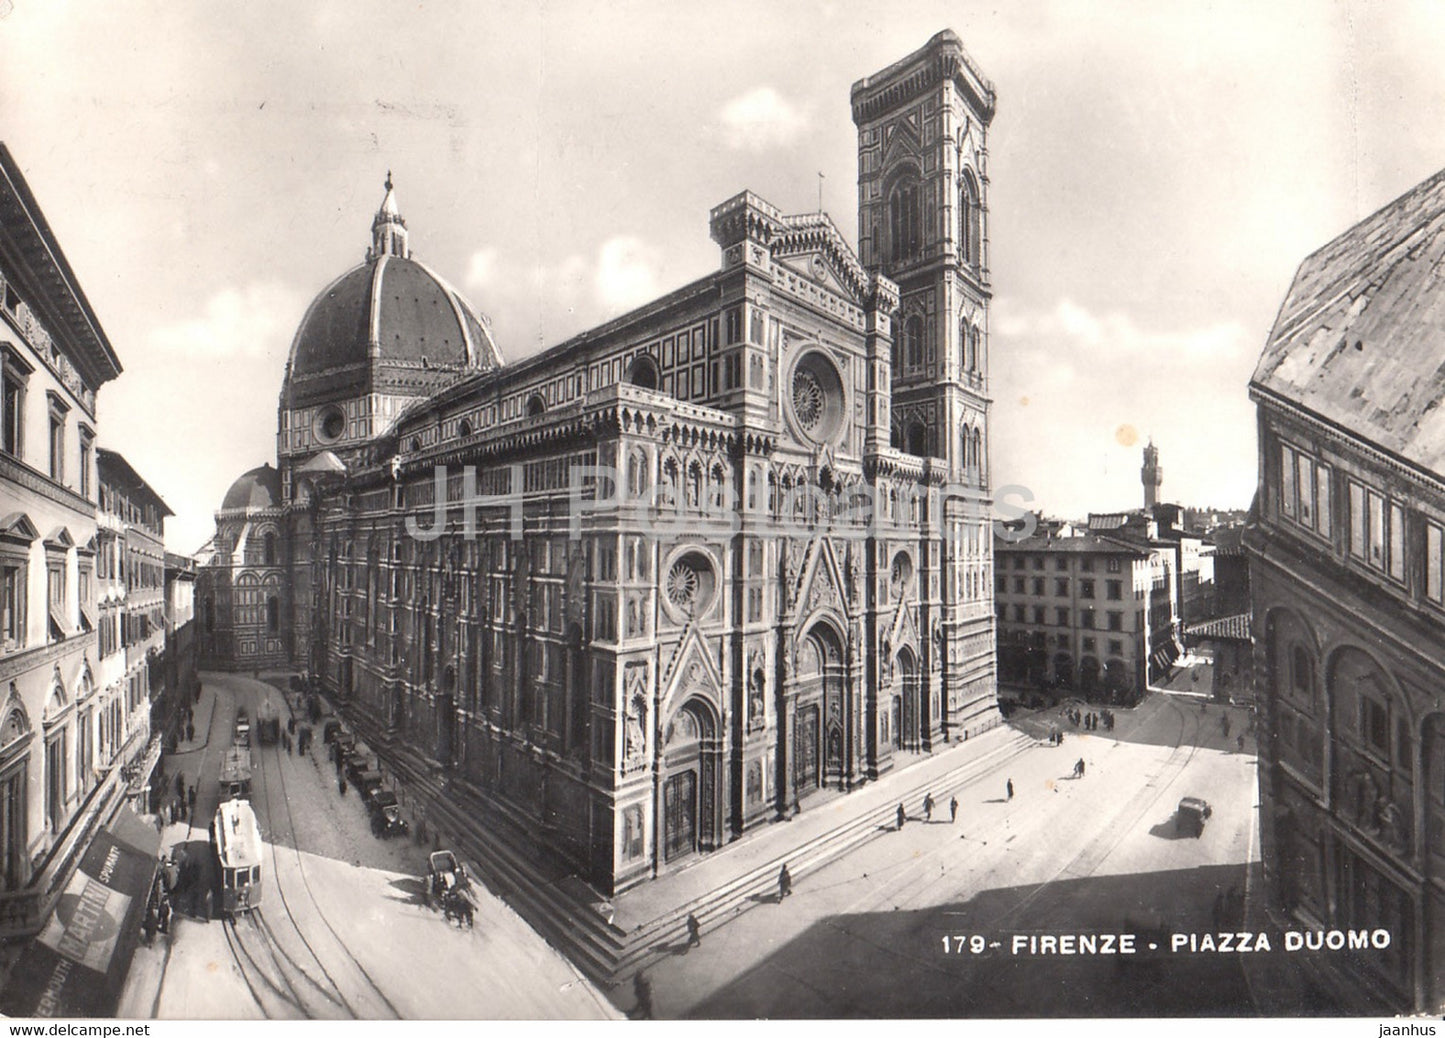 Firenze - Florence - Piazza Duomo - tram - 179 - old postcard - 1950 - Italy - used - JH Postcards